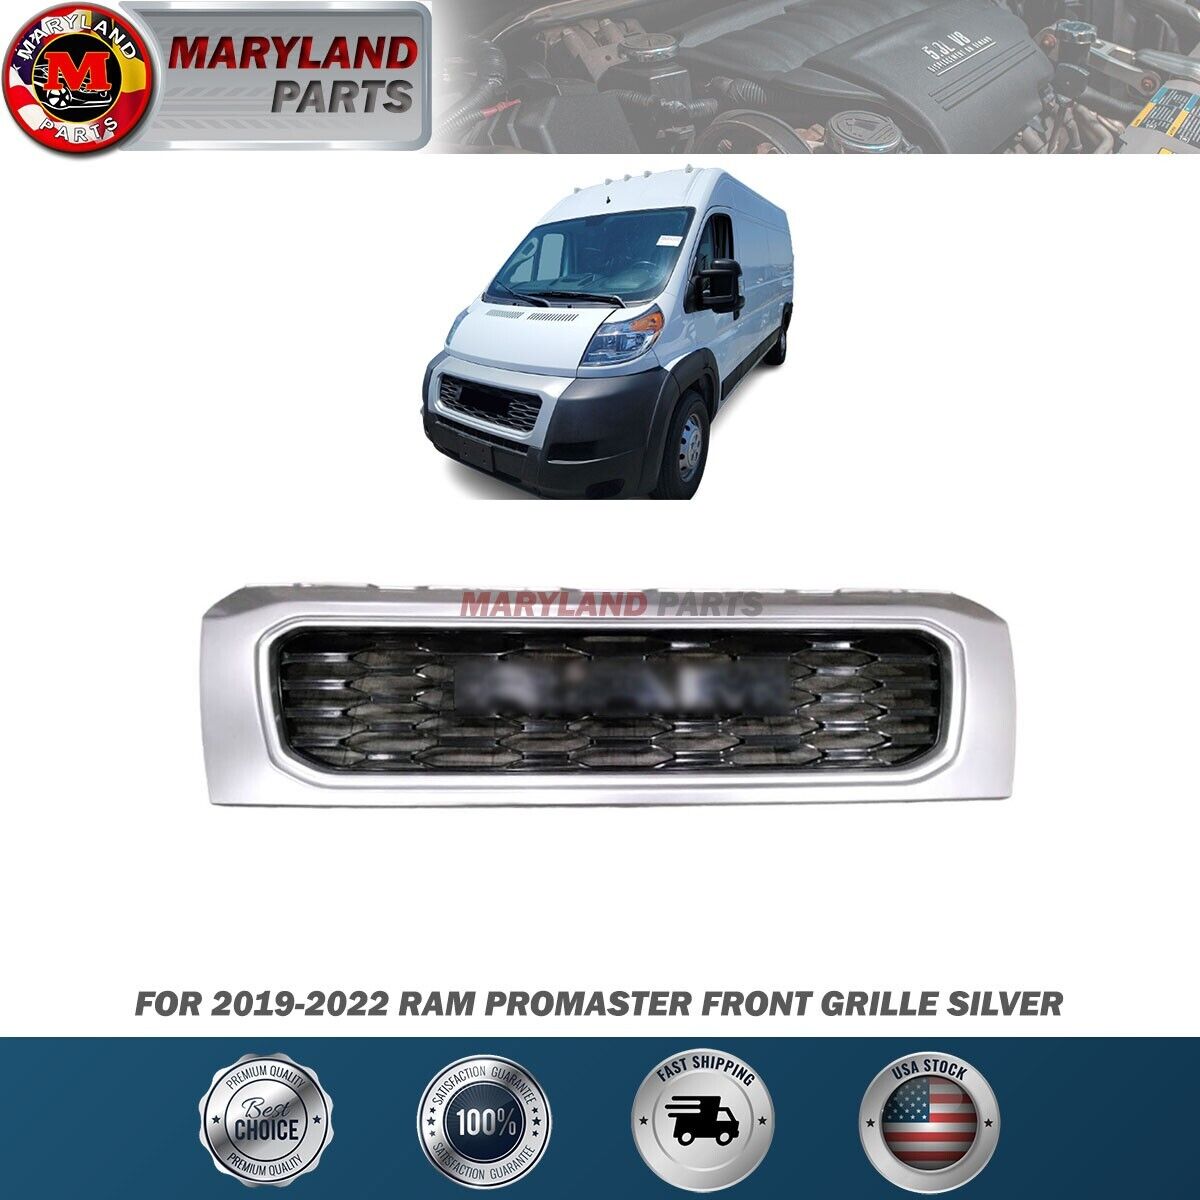 For 2019-2022 RAM Promaster Front Grille Silver